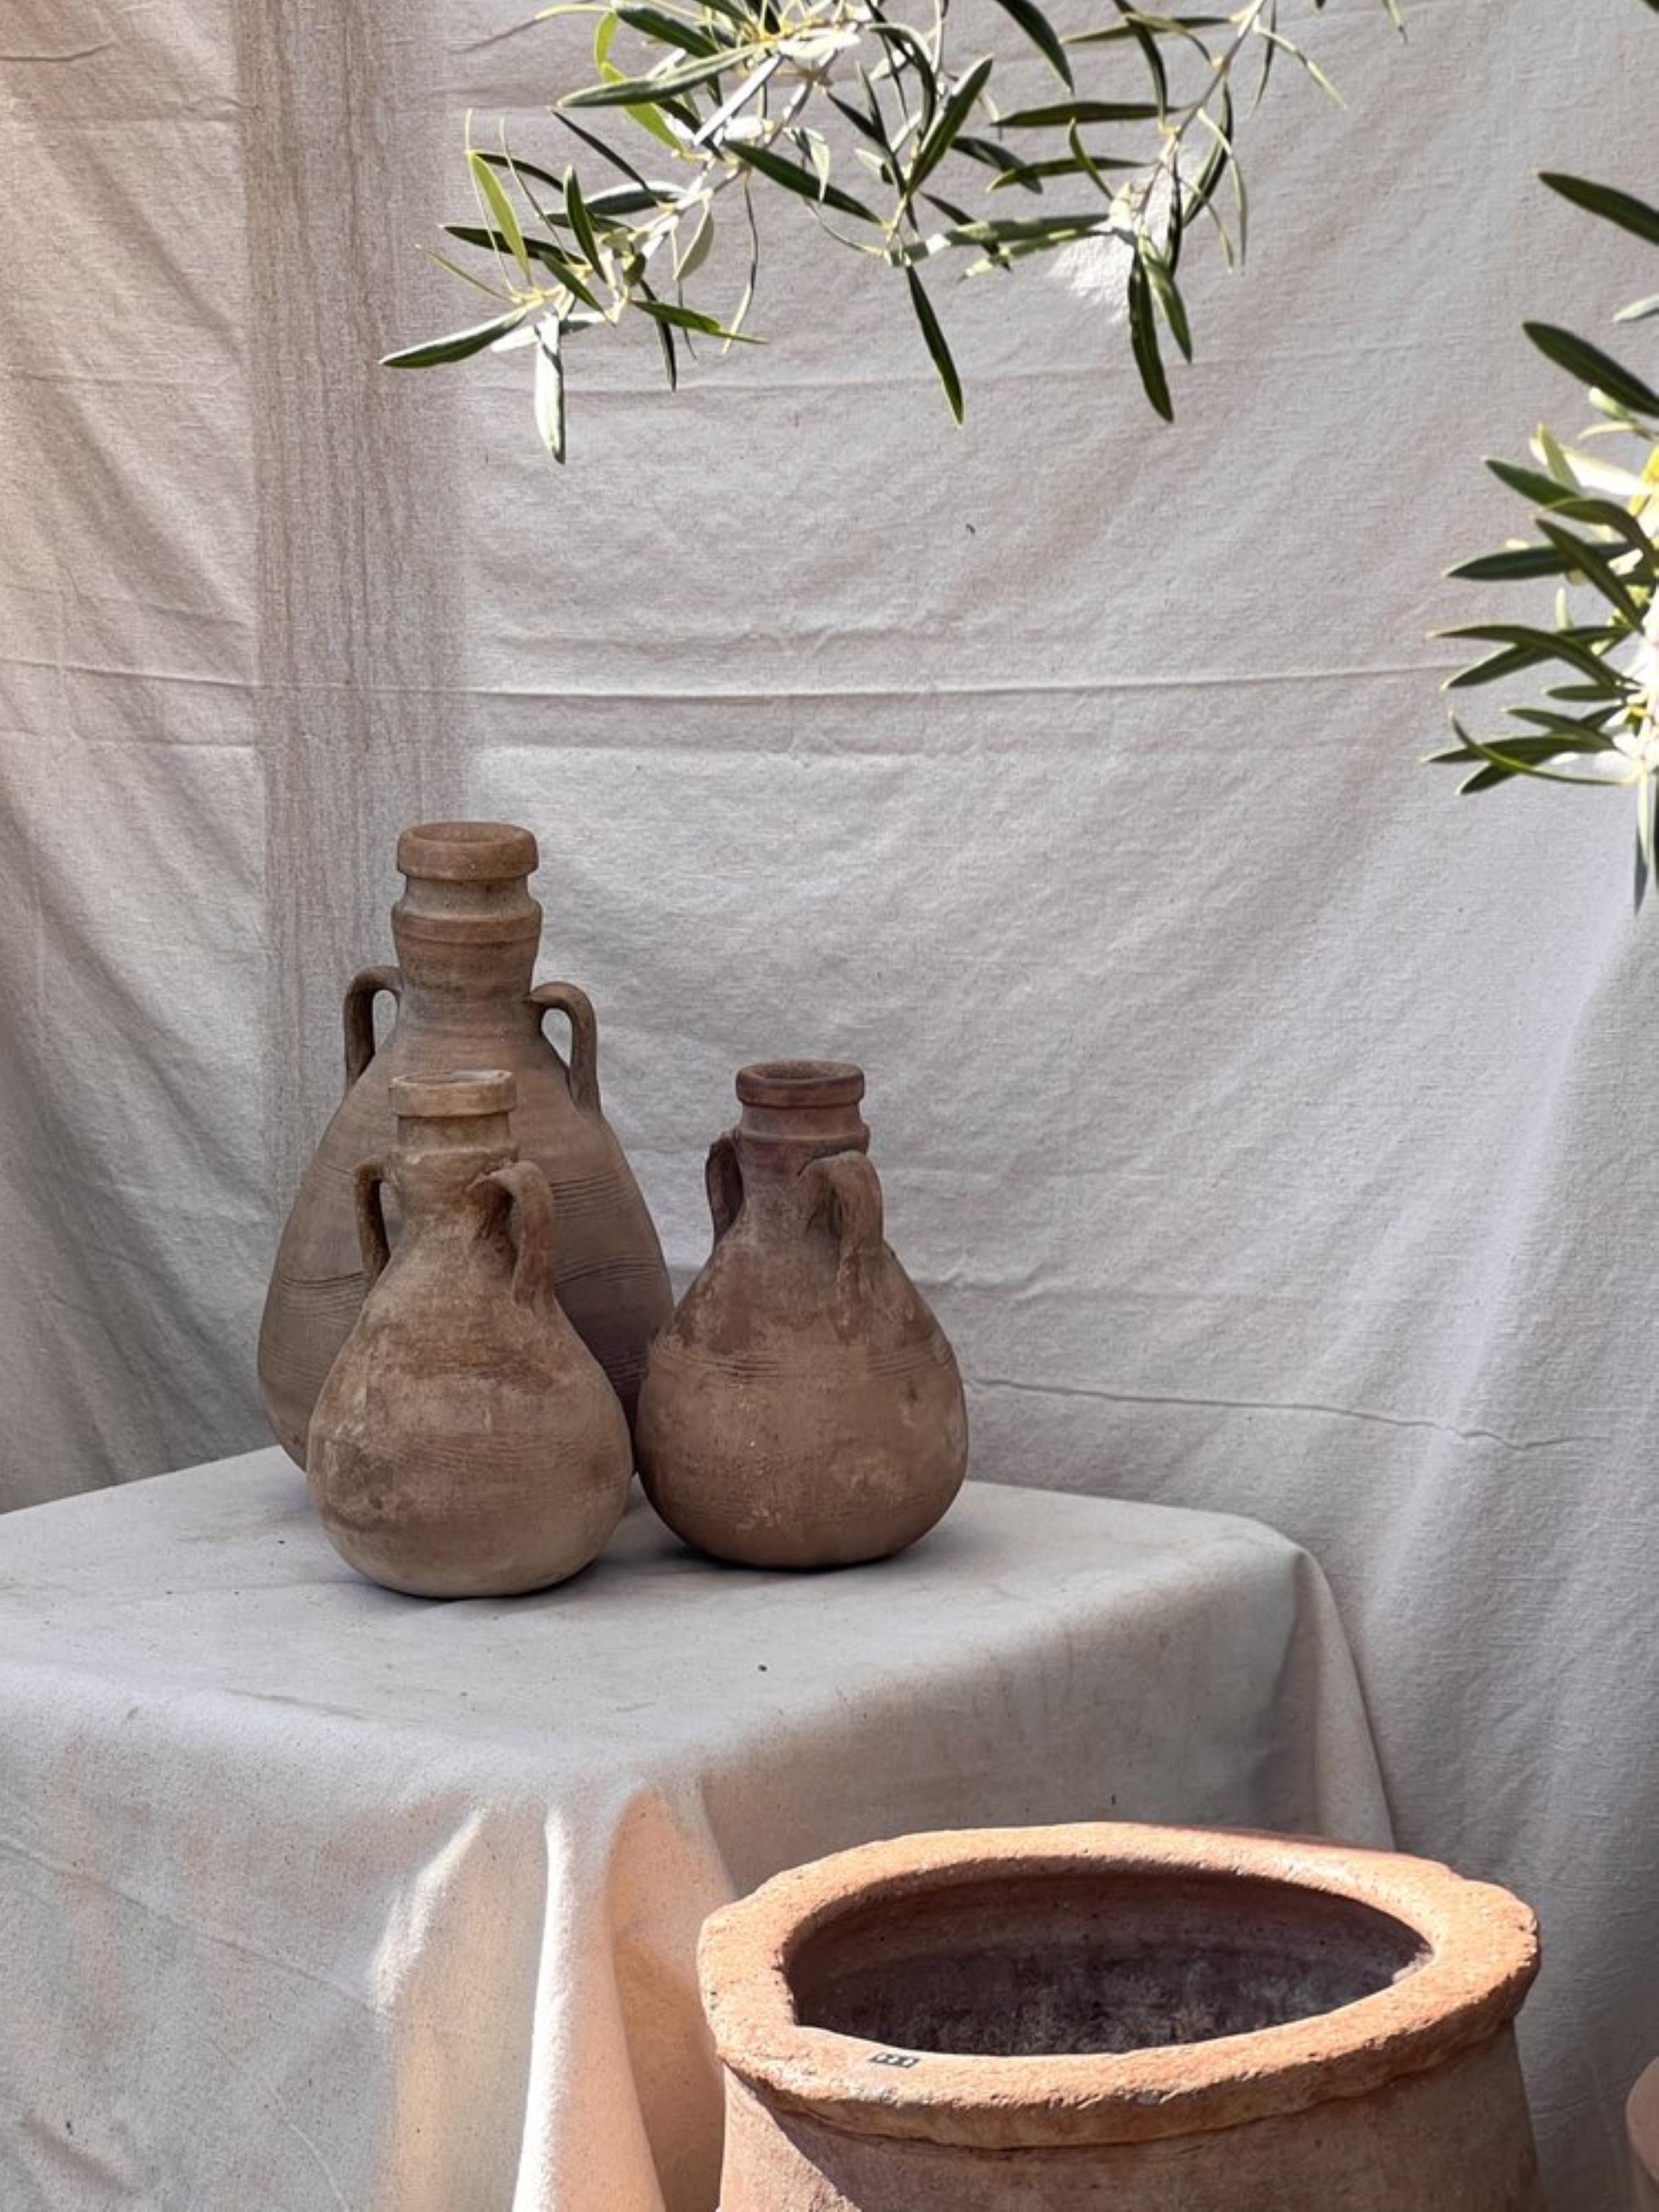 Our Terracotta Roman Pottery Set with Our Captivating Sphere-Shaped Wine Amphorae. Each Amphora is Meticulously Crafted with Two Handles, a Flattened Base, and Adorned with Enchanting Spiral-Shaped Random Pottery Markings on the Surface. Dating Back